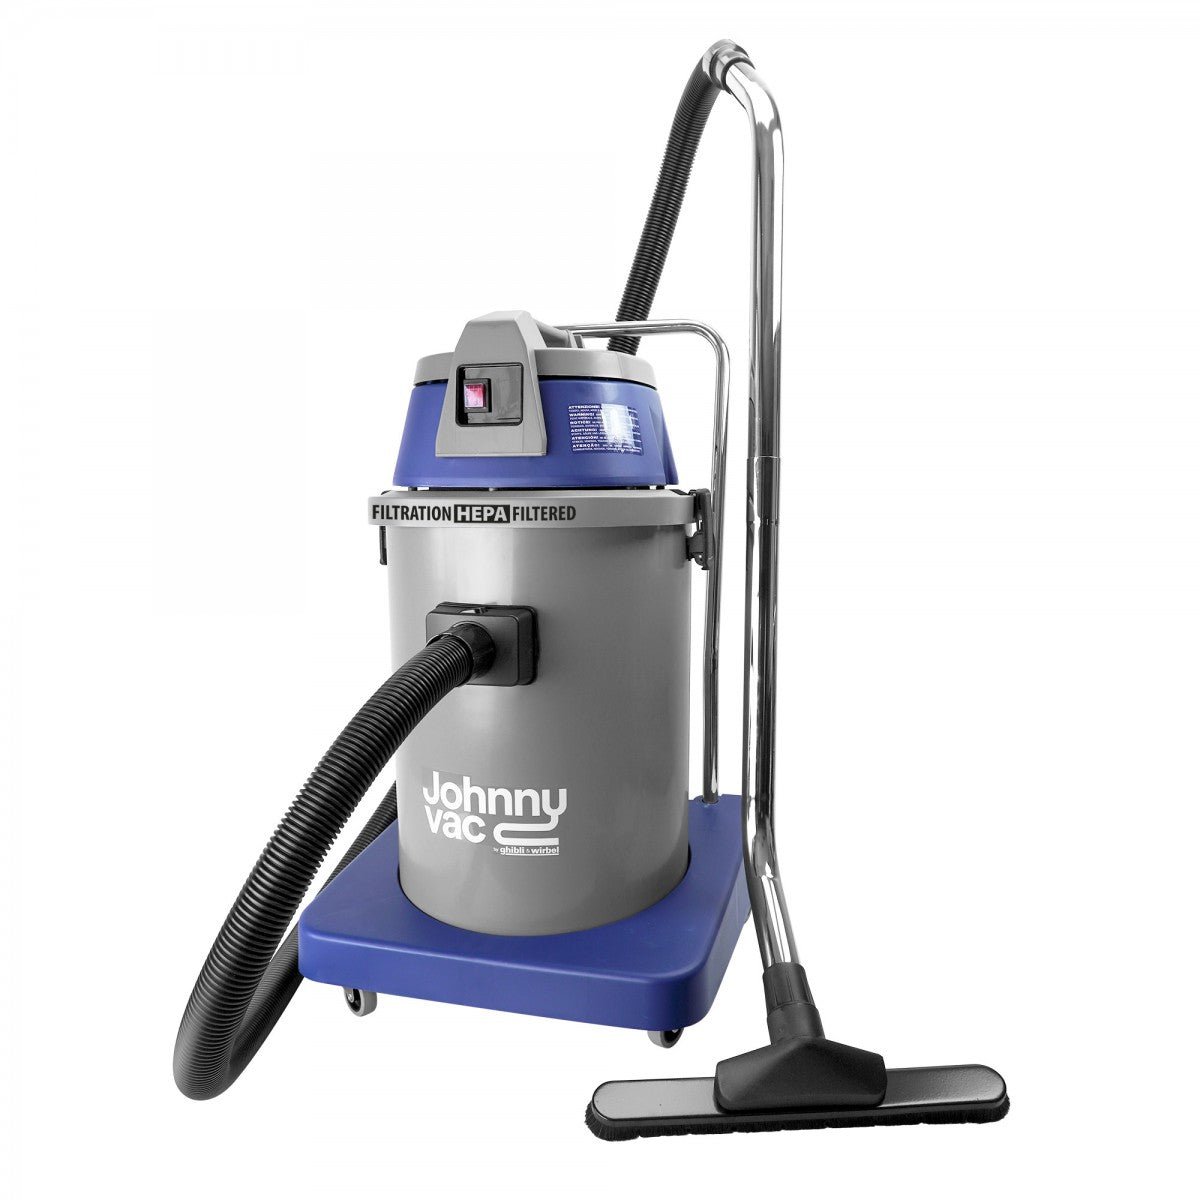 Johnny Vac / Ghibli HEPA Certified Commercial Vacuum Cleaner JV400H - Canister Vacuums